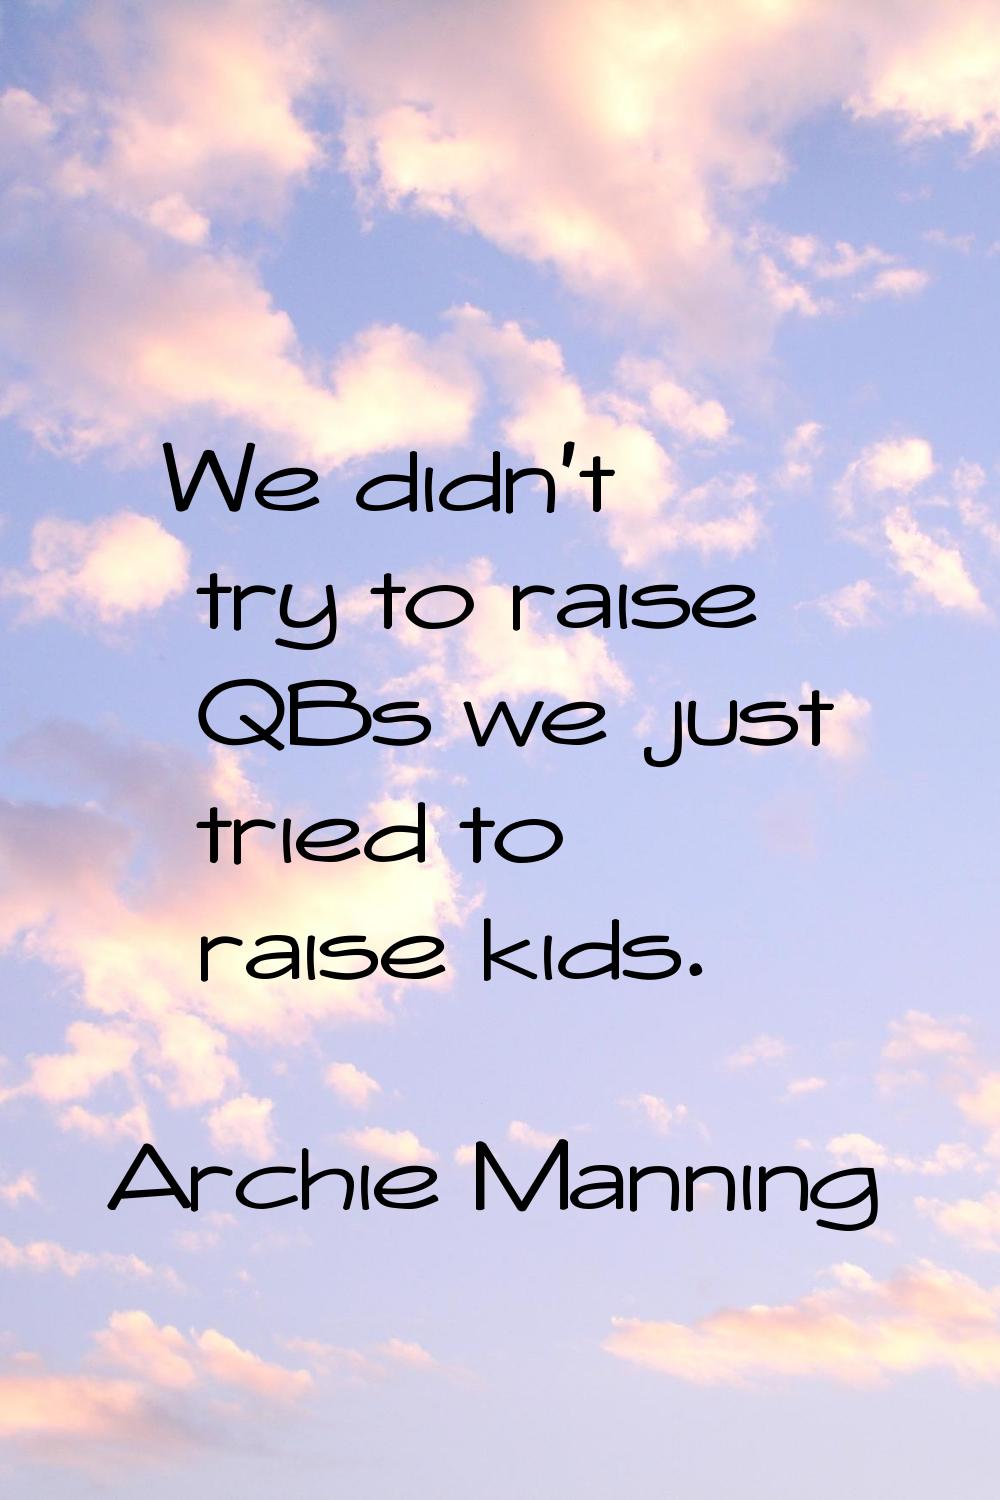 We didn't try to raise QBs we just tried to raise kids.